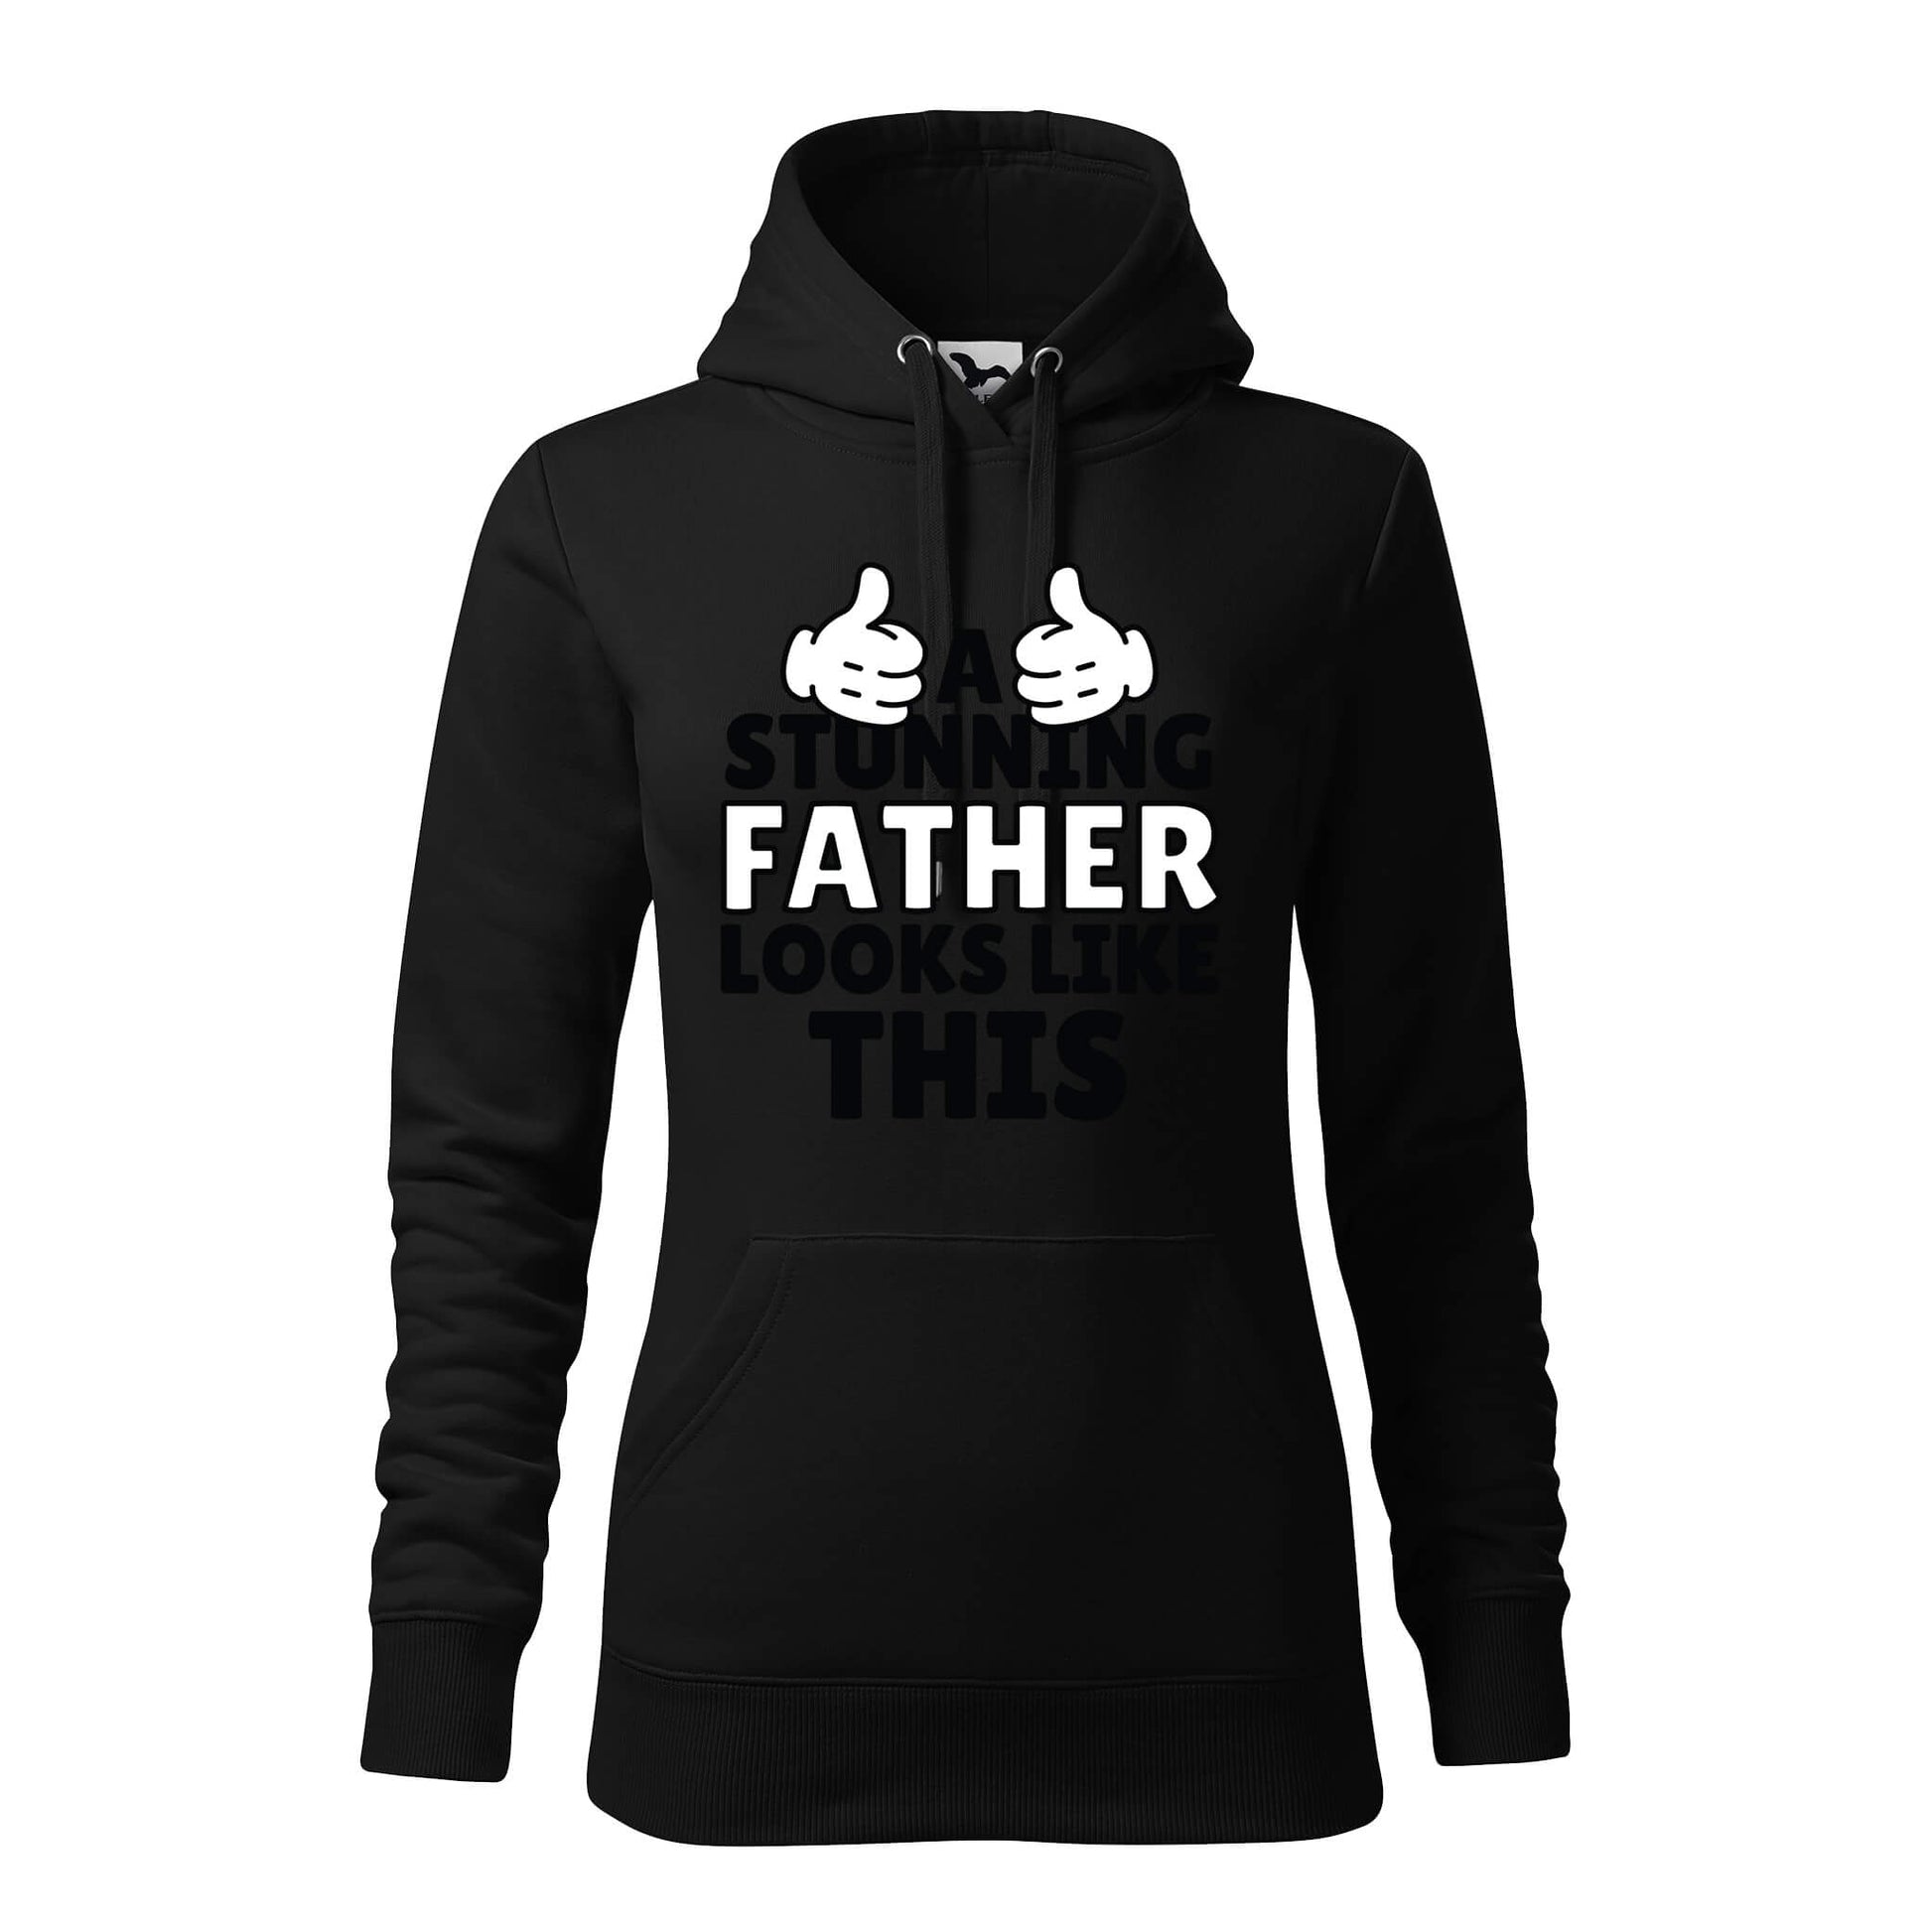 Stunning father looks like this hoodie - rvdesignprint